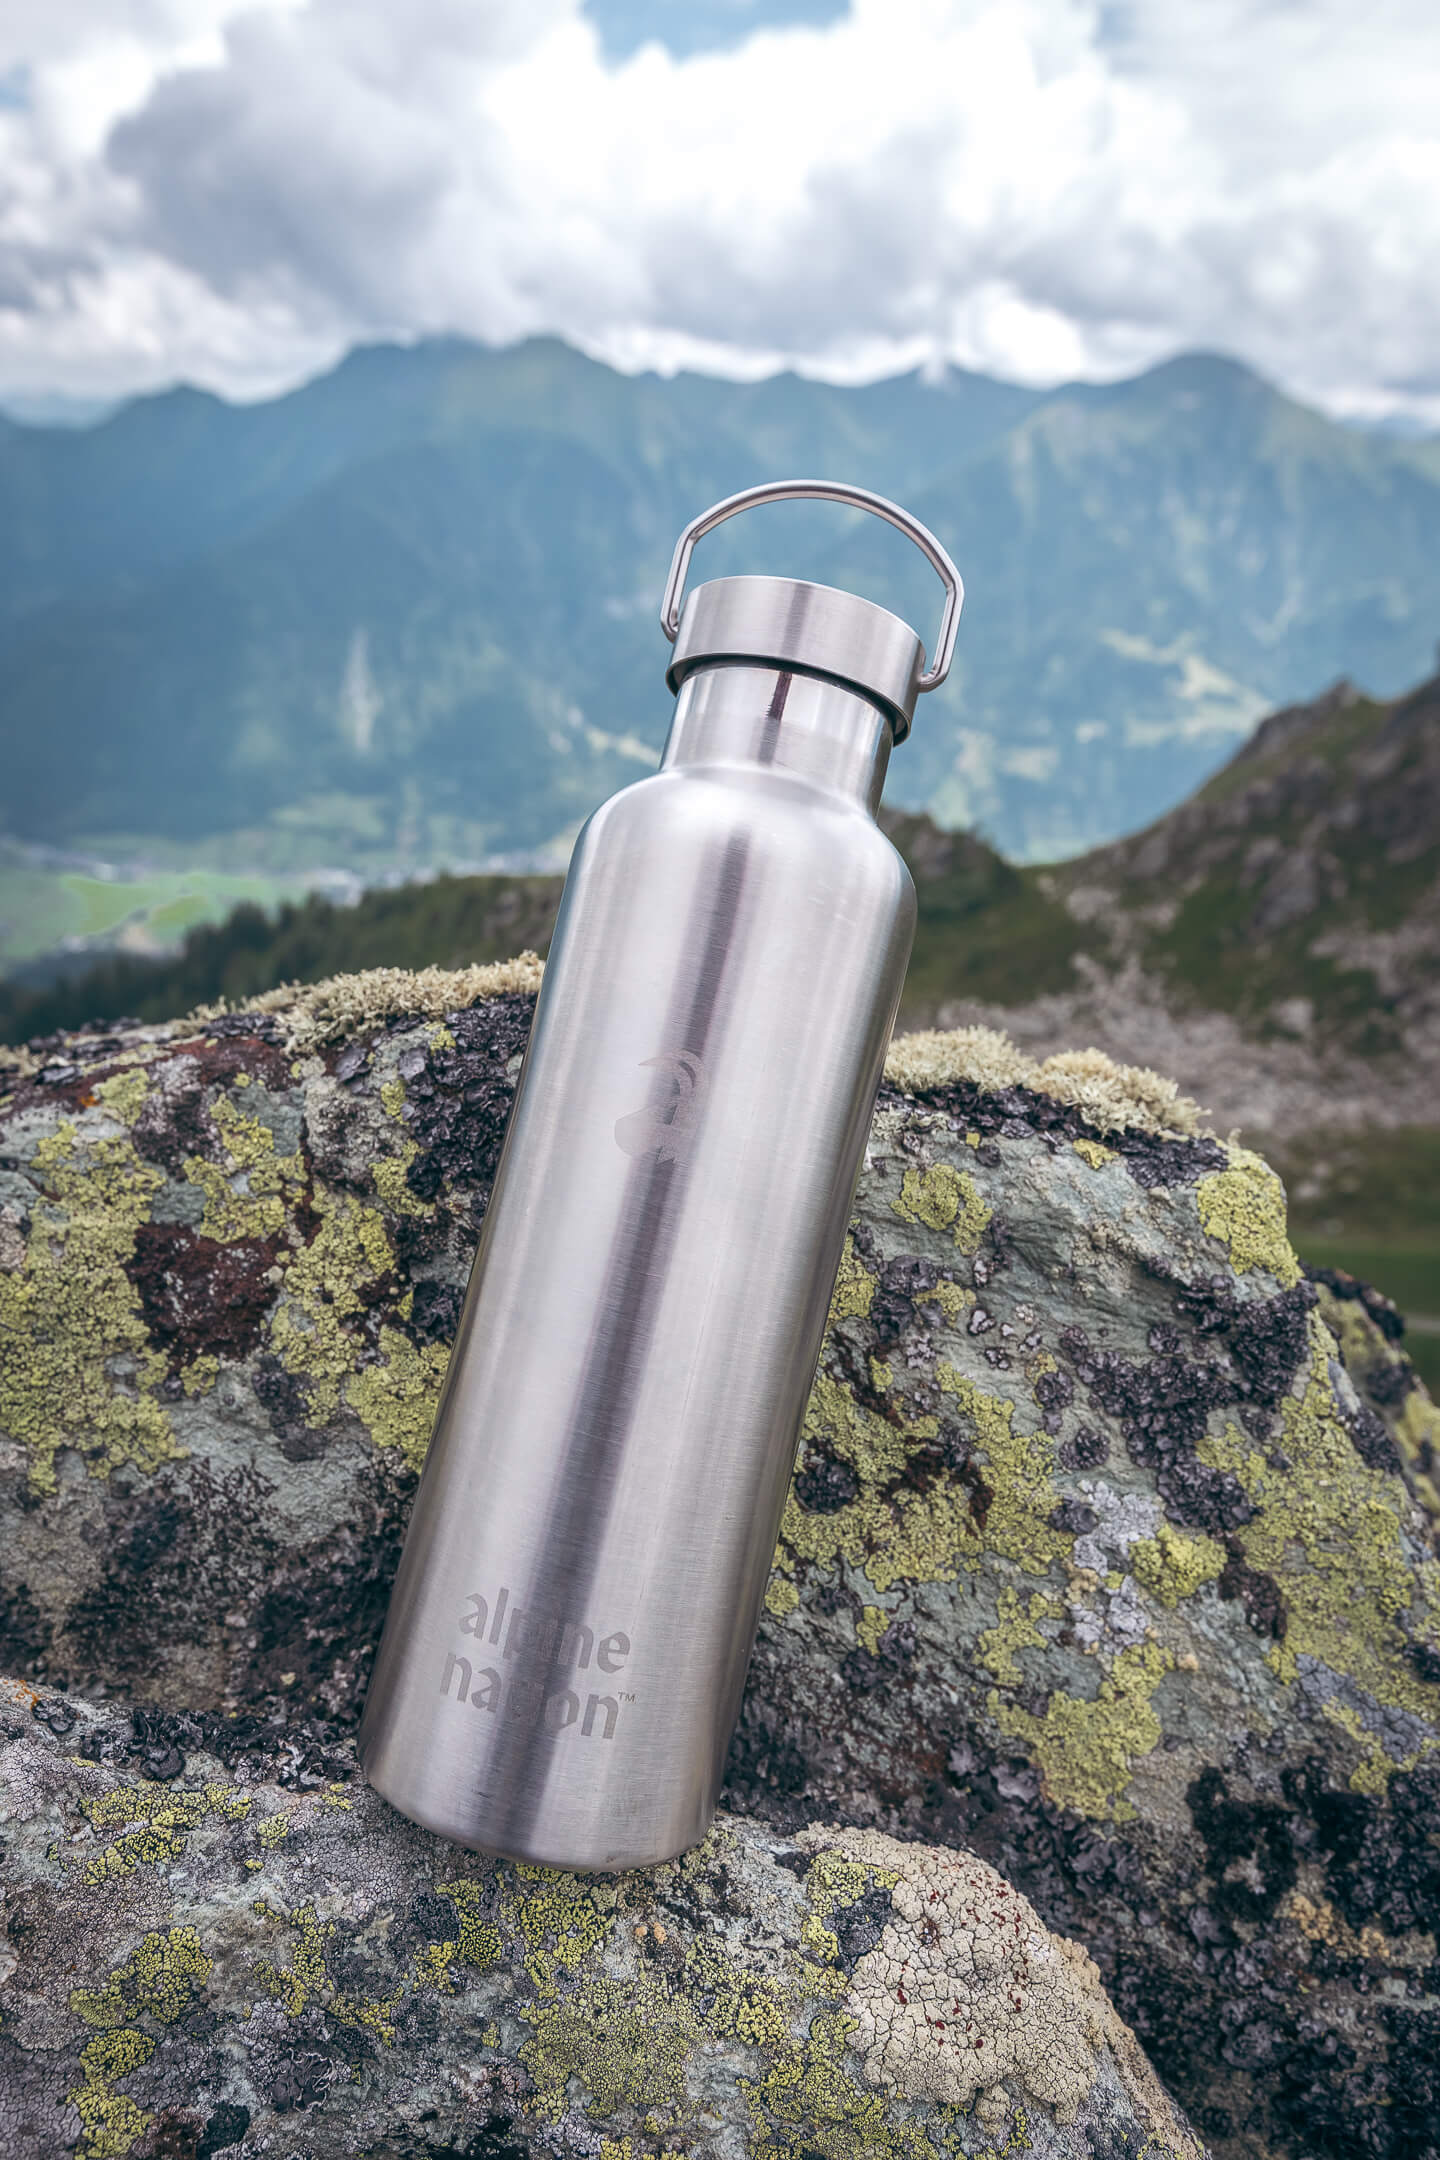 Insulated Water Bottle: Snow Graphic and Bamboo Cap